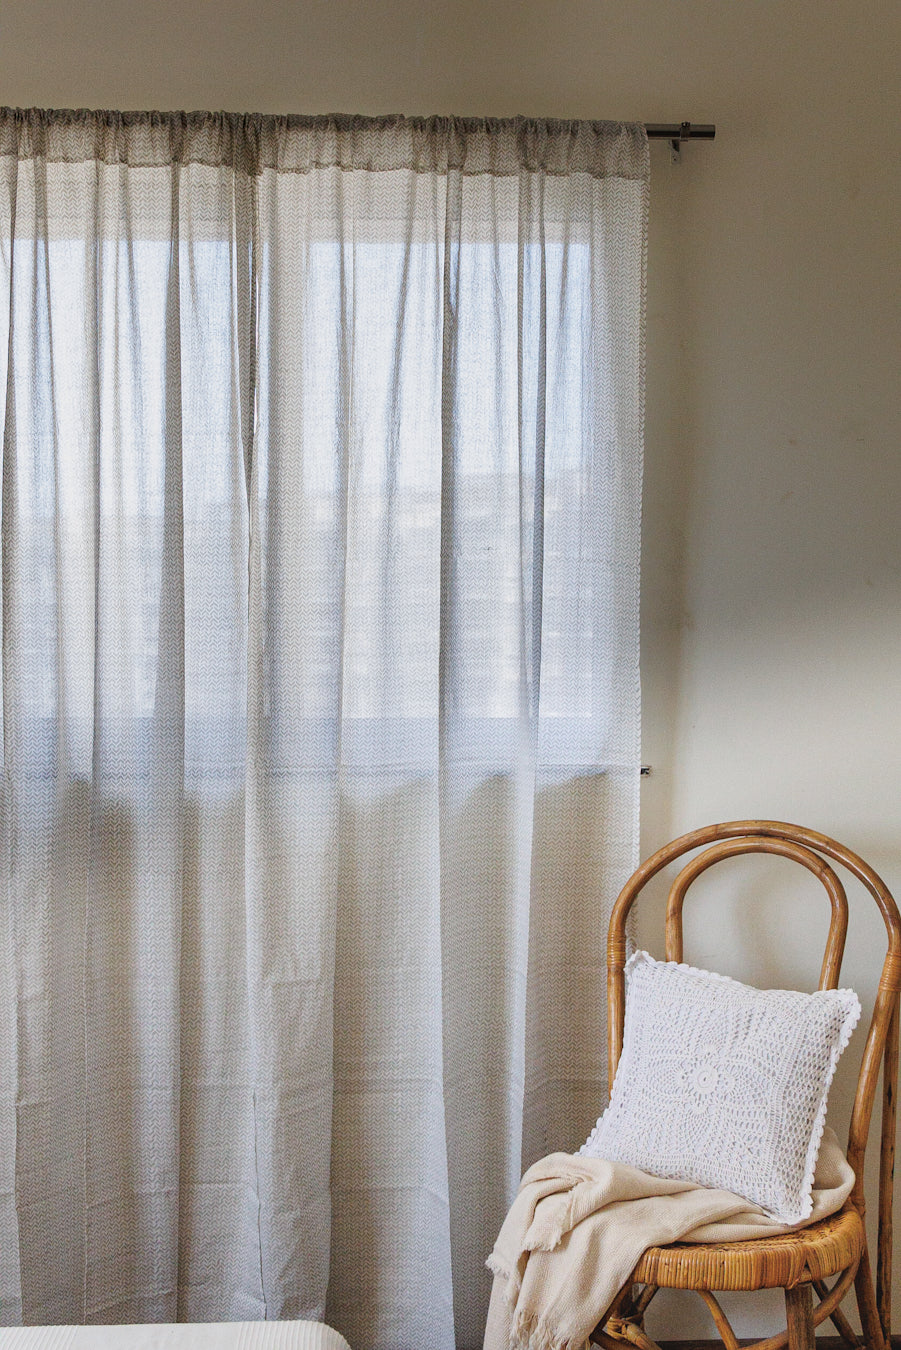 Grey geometric sheer curtain - lightweight sheer curtains - Sold individually